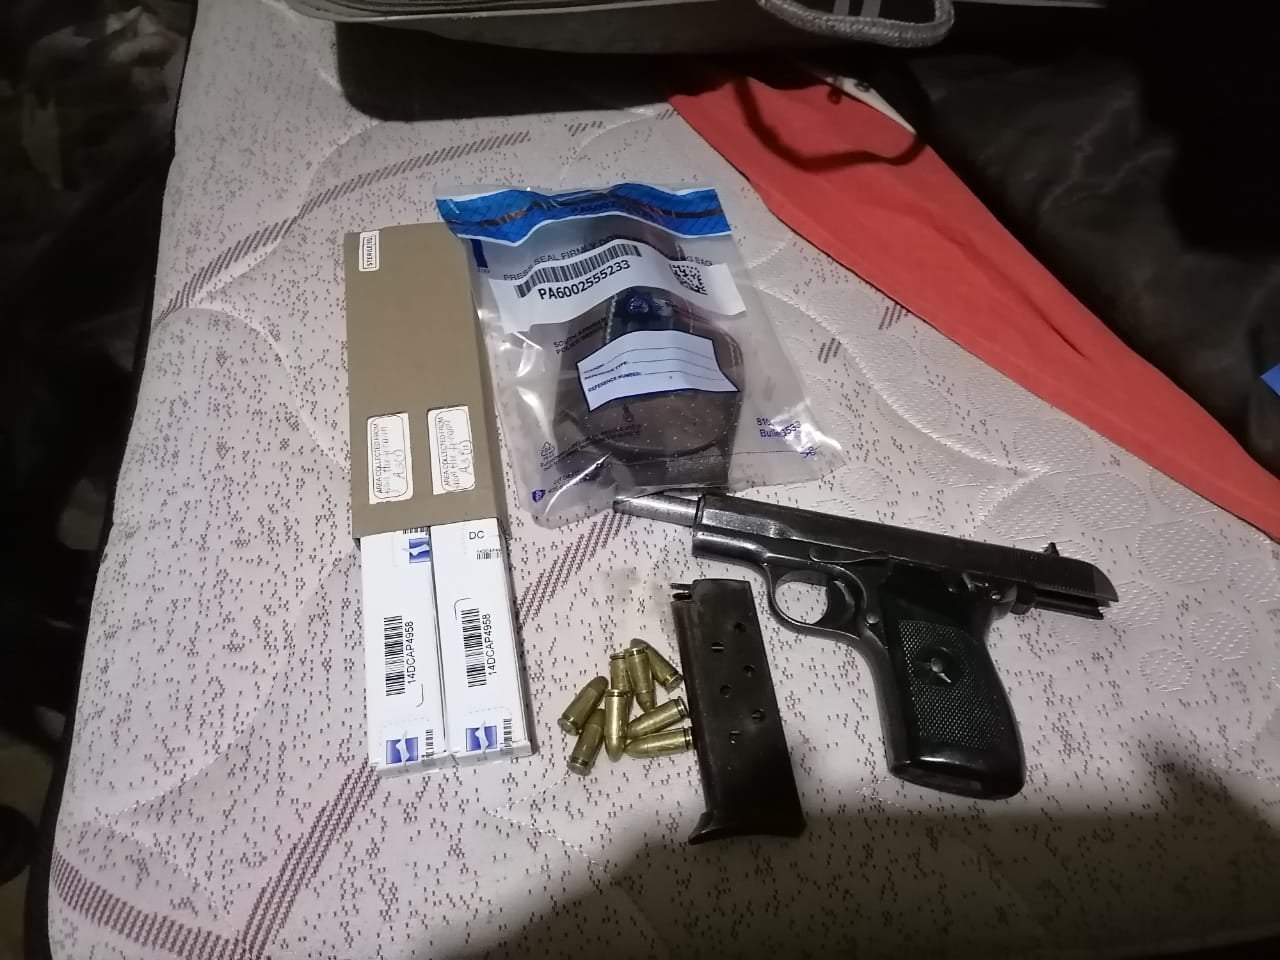 Two Maluti suspects arrested for possession of illegal firearms